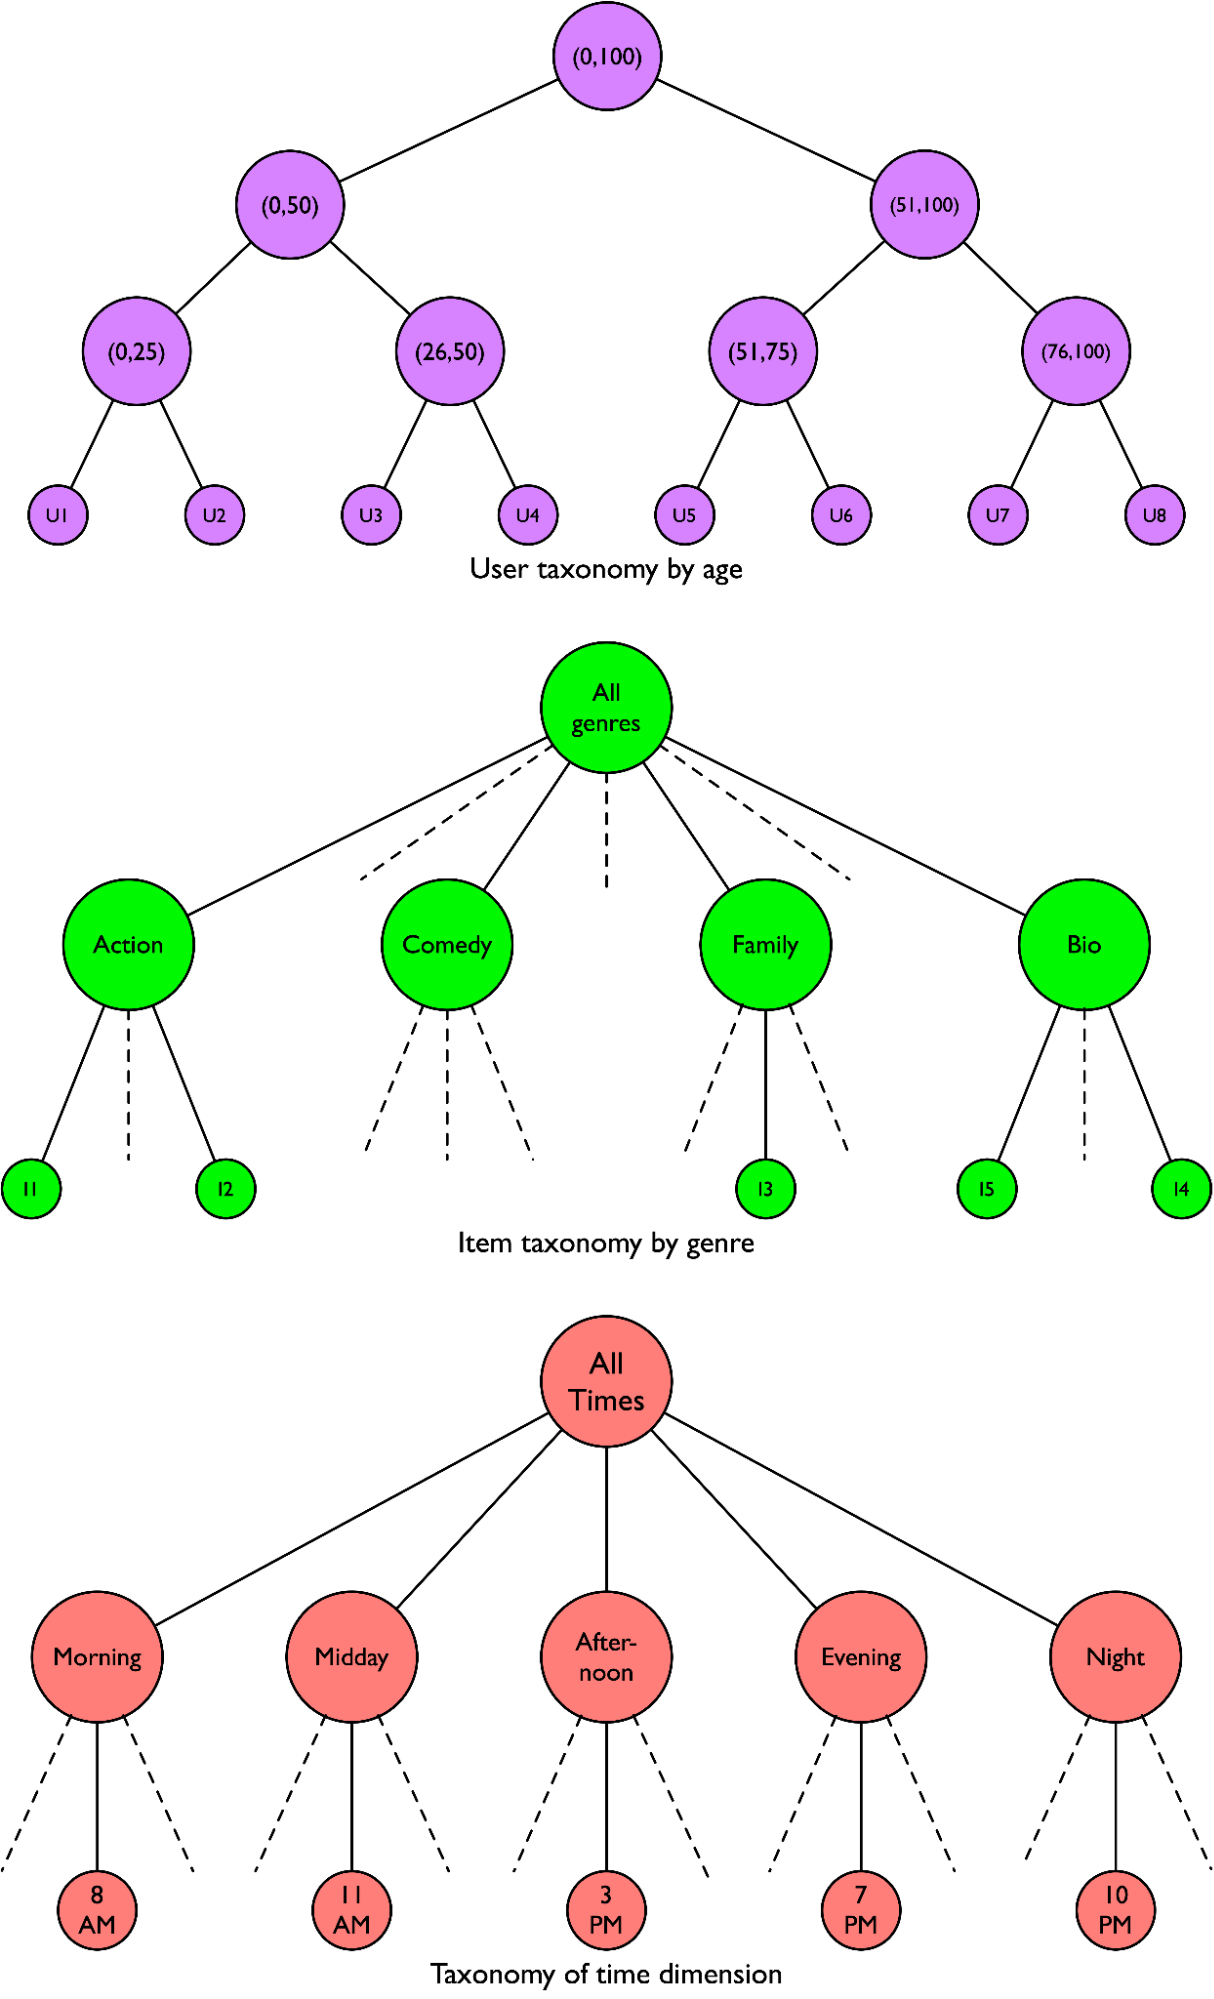 Example of a hierarchy